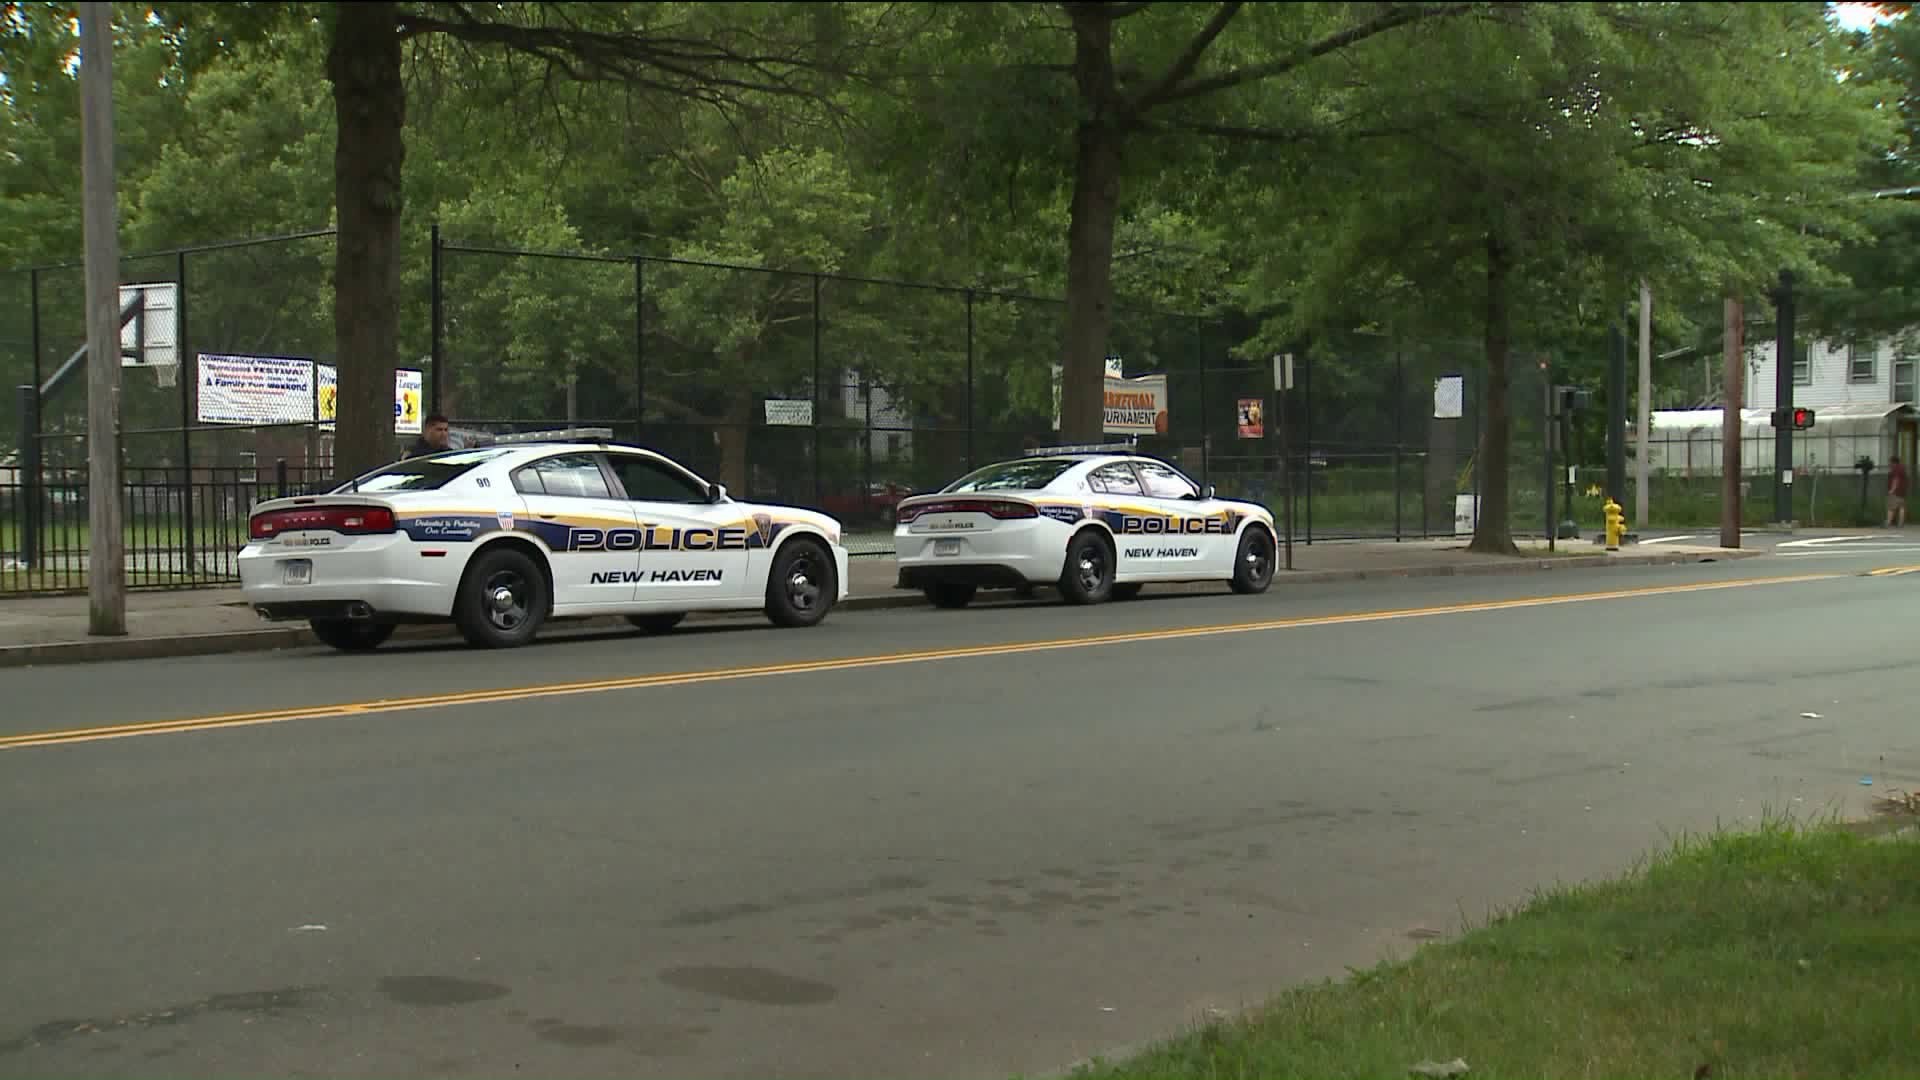 13 year-old shot in New Haven